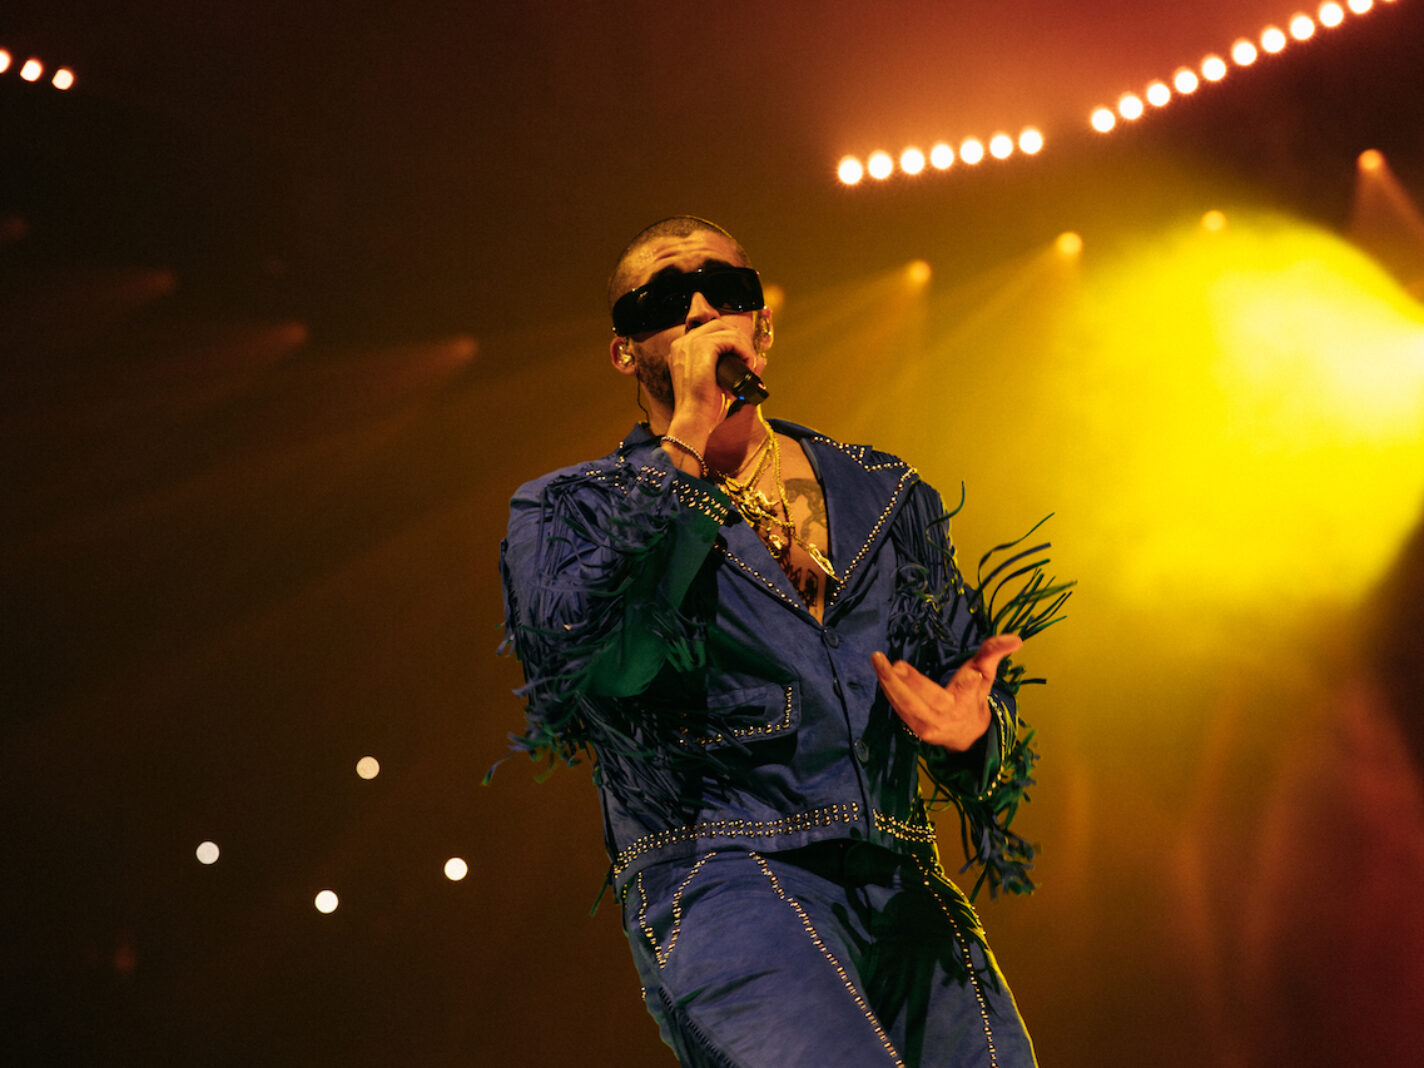 Bad Bunny's Most Wanted tour: What fans can expect from LA shows